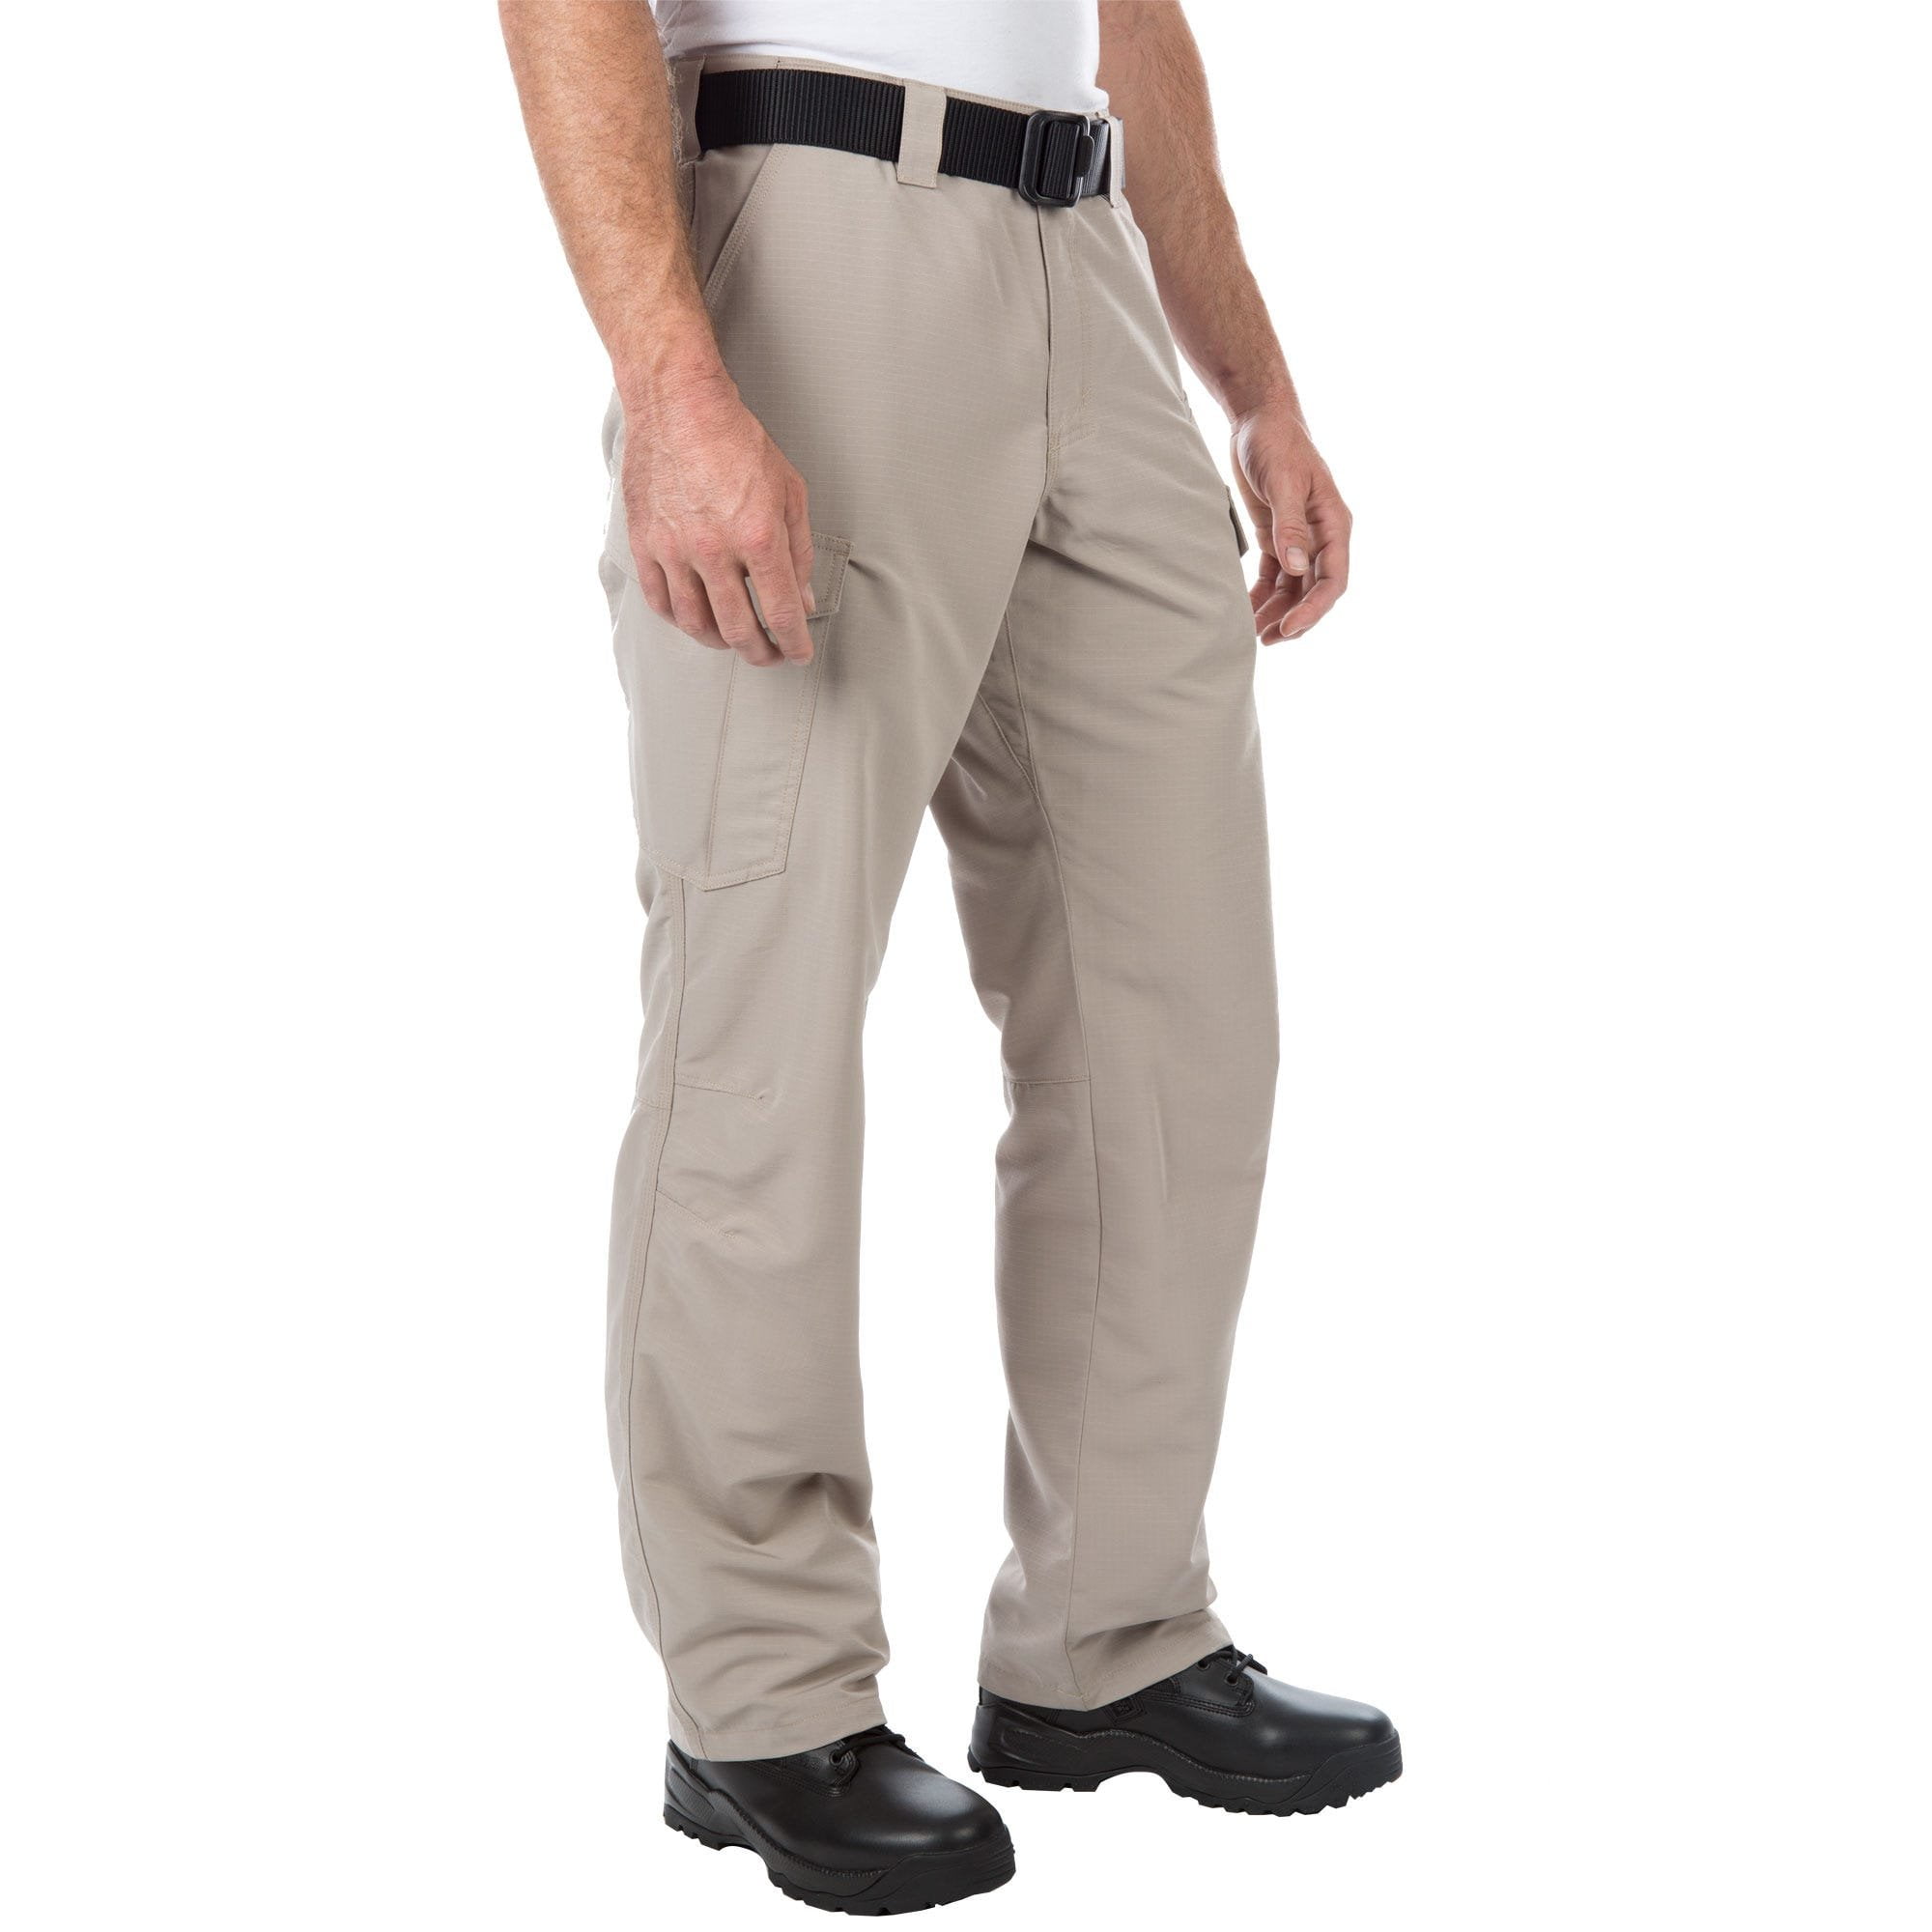 Style 74461 Self-Adjusting Waistband 5.11 Tactical Mens Fast-Tac Urban Pants Water-Resistant Finish 